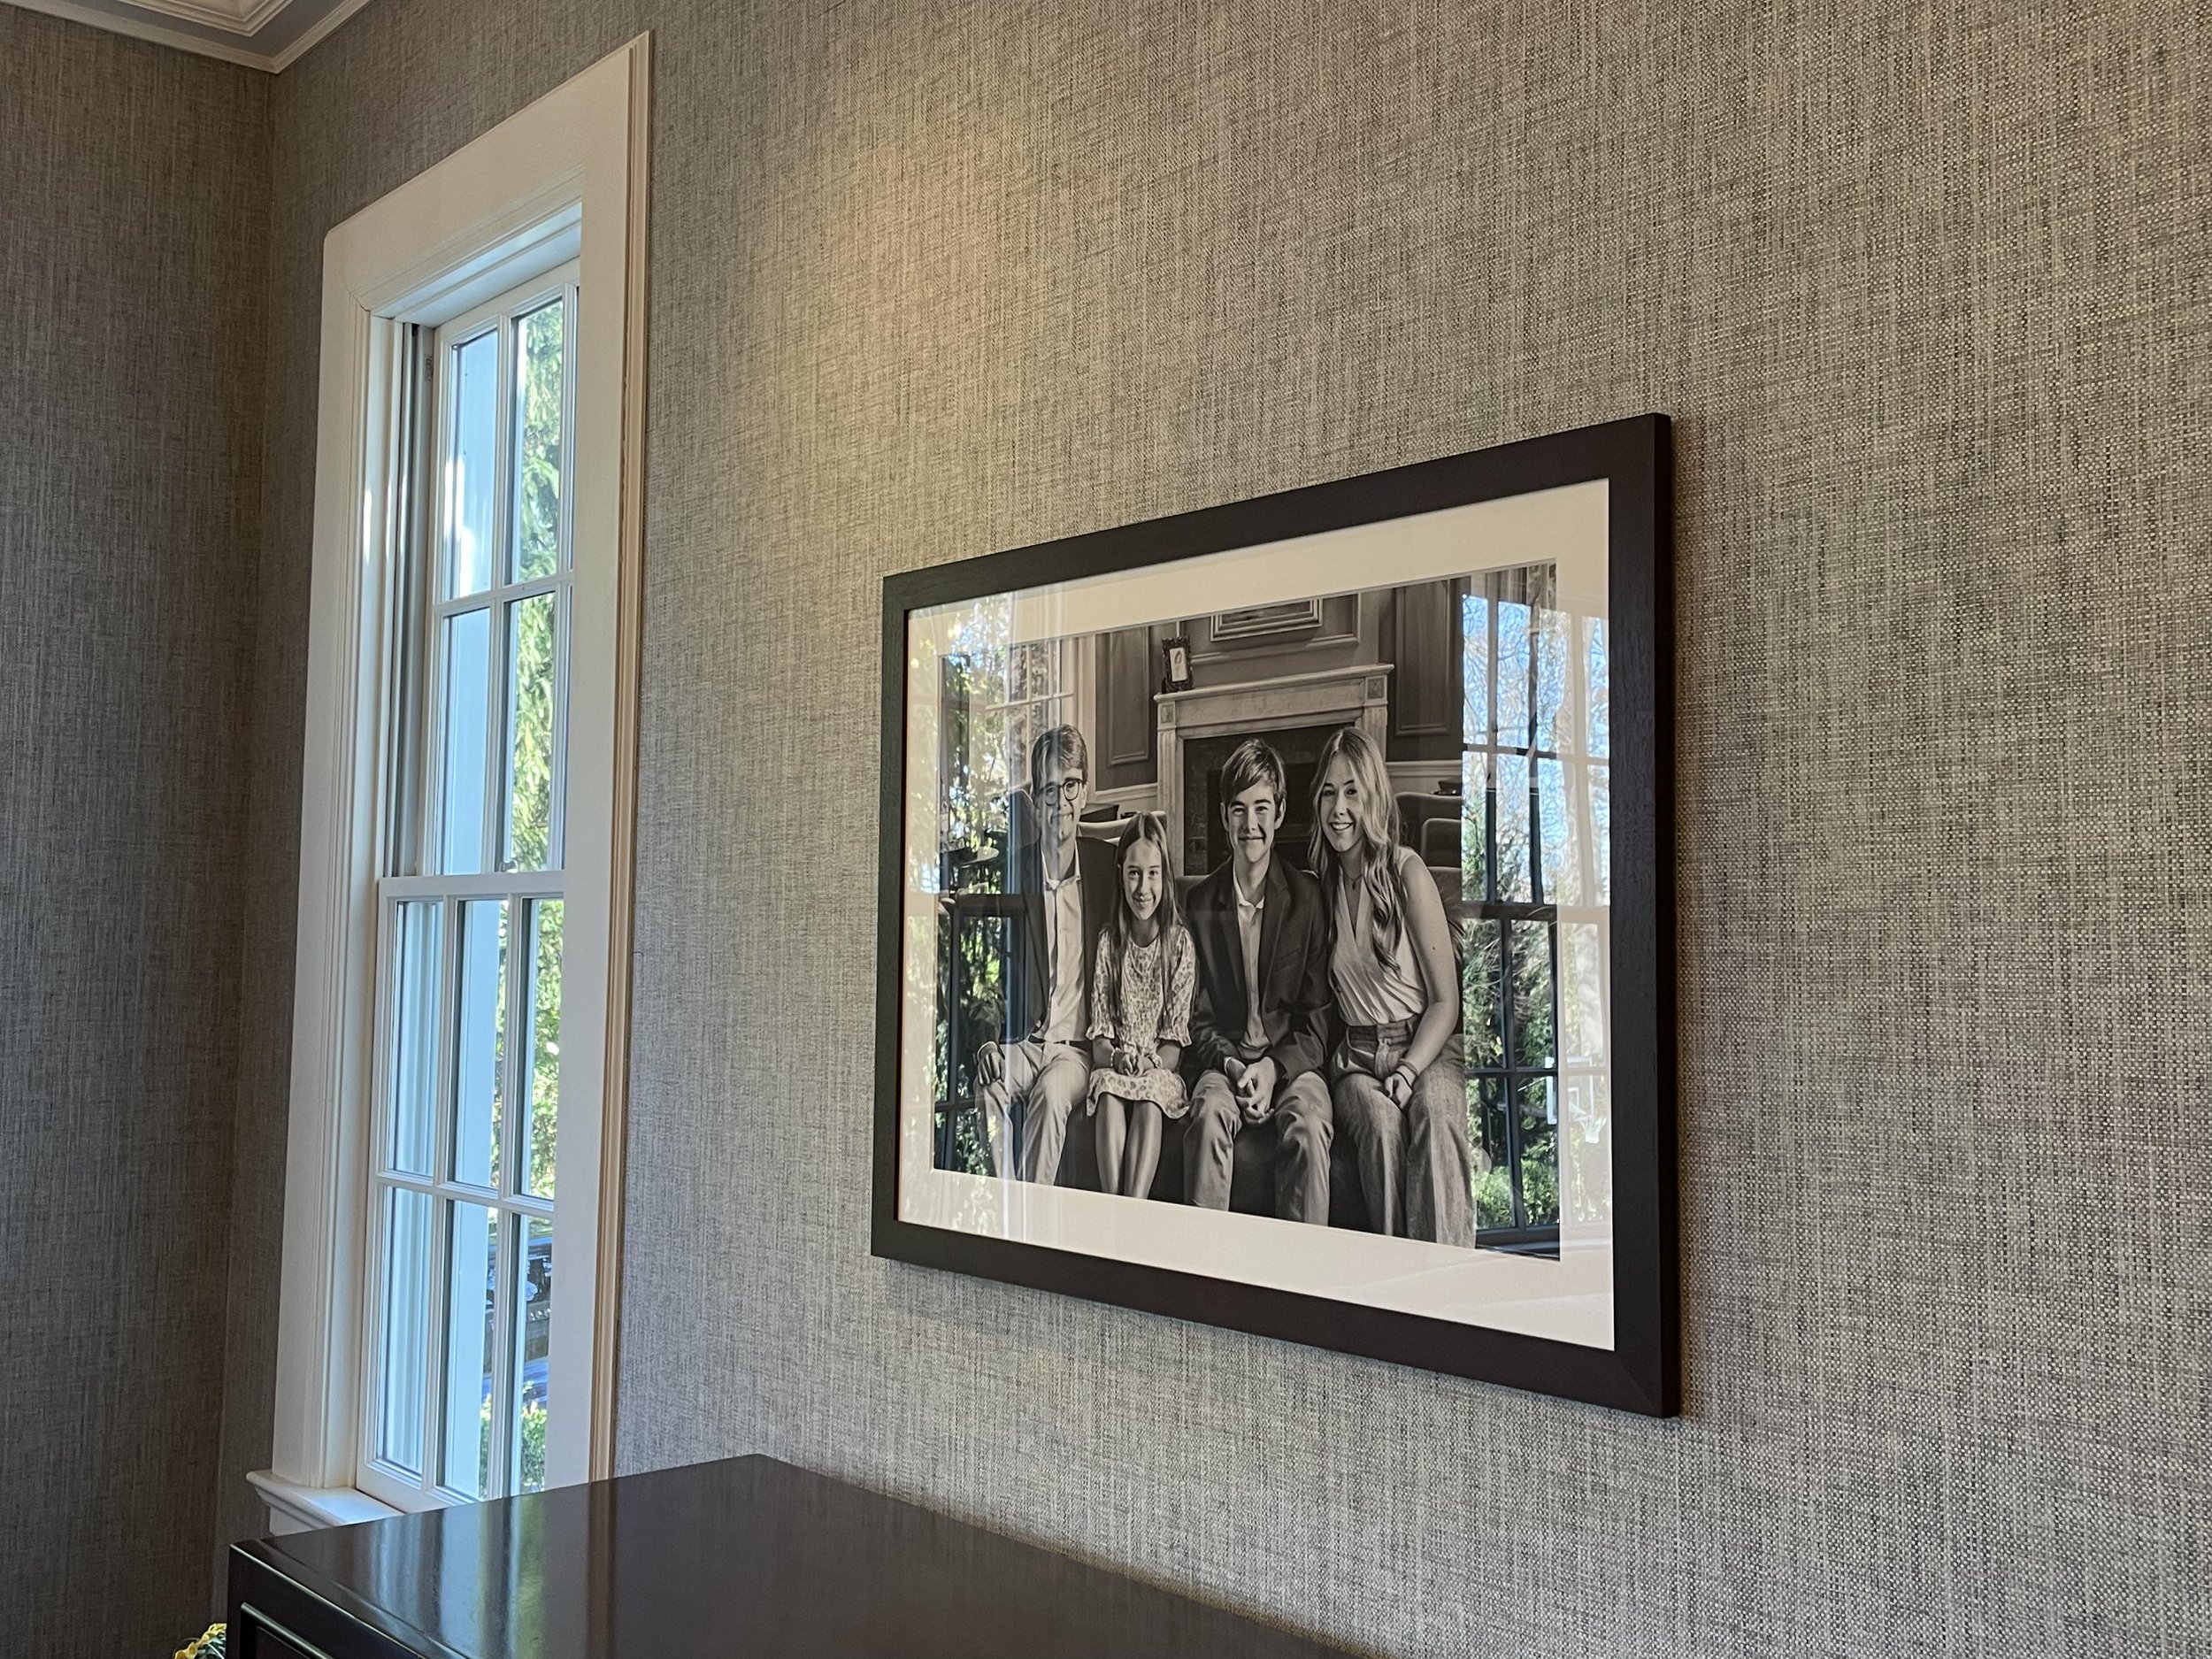  A Nicole Hawkins Photography family portrait in a black frame displayed on a wall in a New Jersey home. family portraits displayed #NicoleHawkinsPhotography #NicoleHawkinsFamilyPortrait #NicoleHawkinsSenior #NJPortraits #siblingportrait 